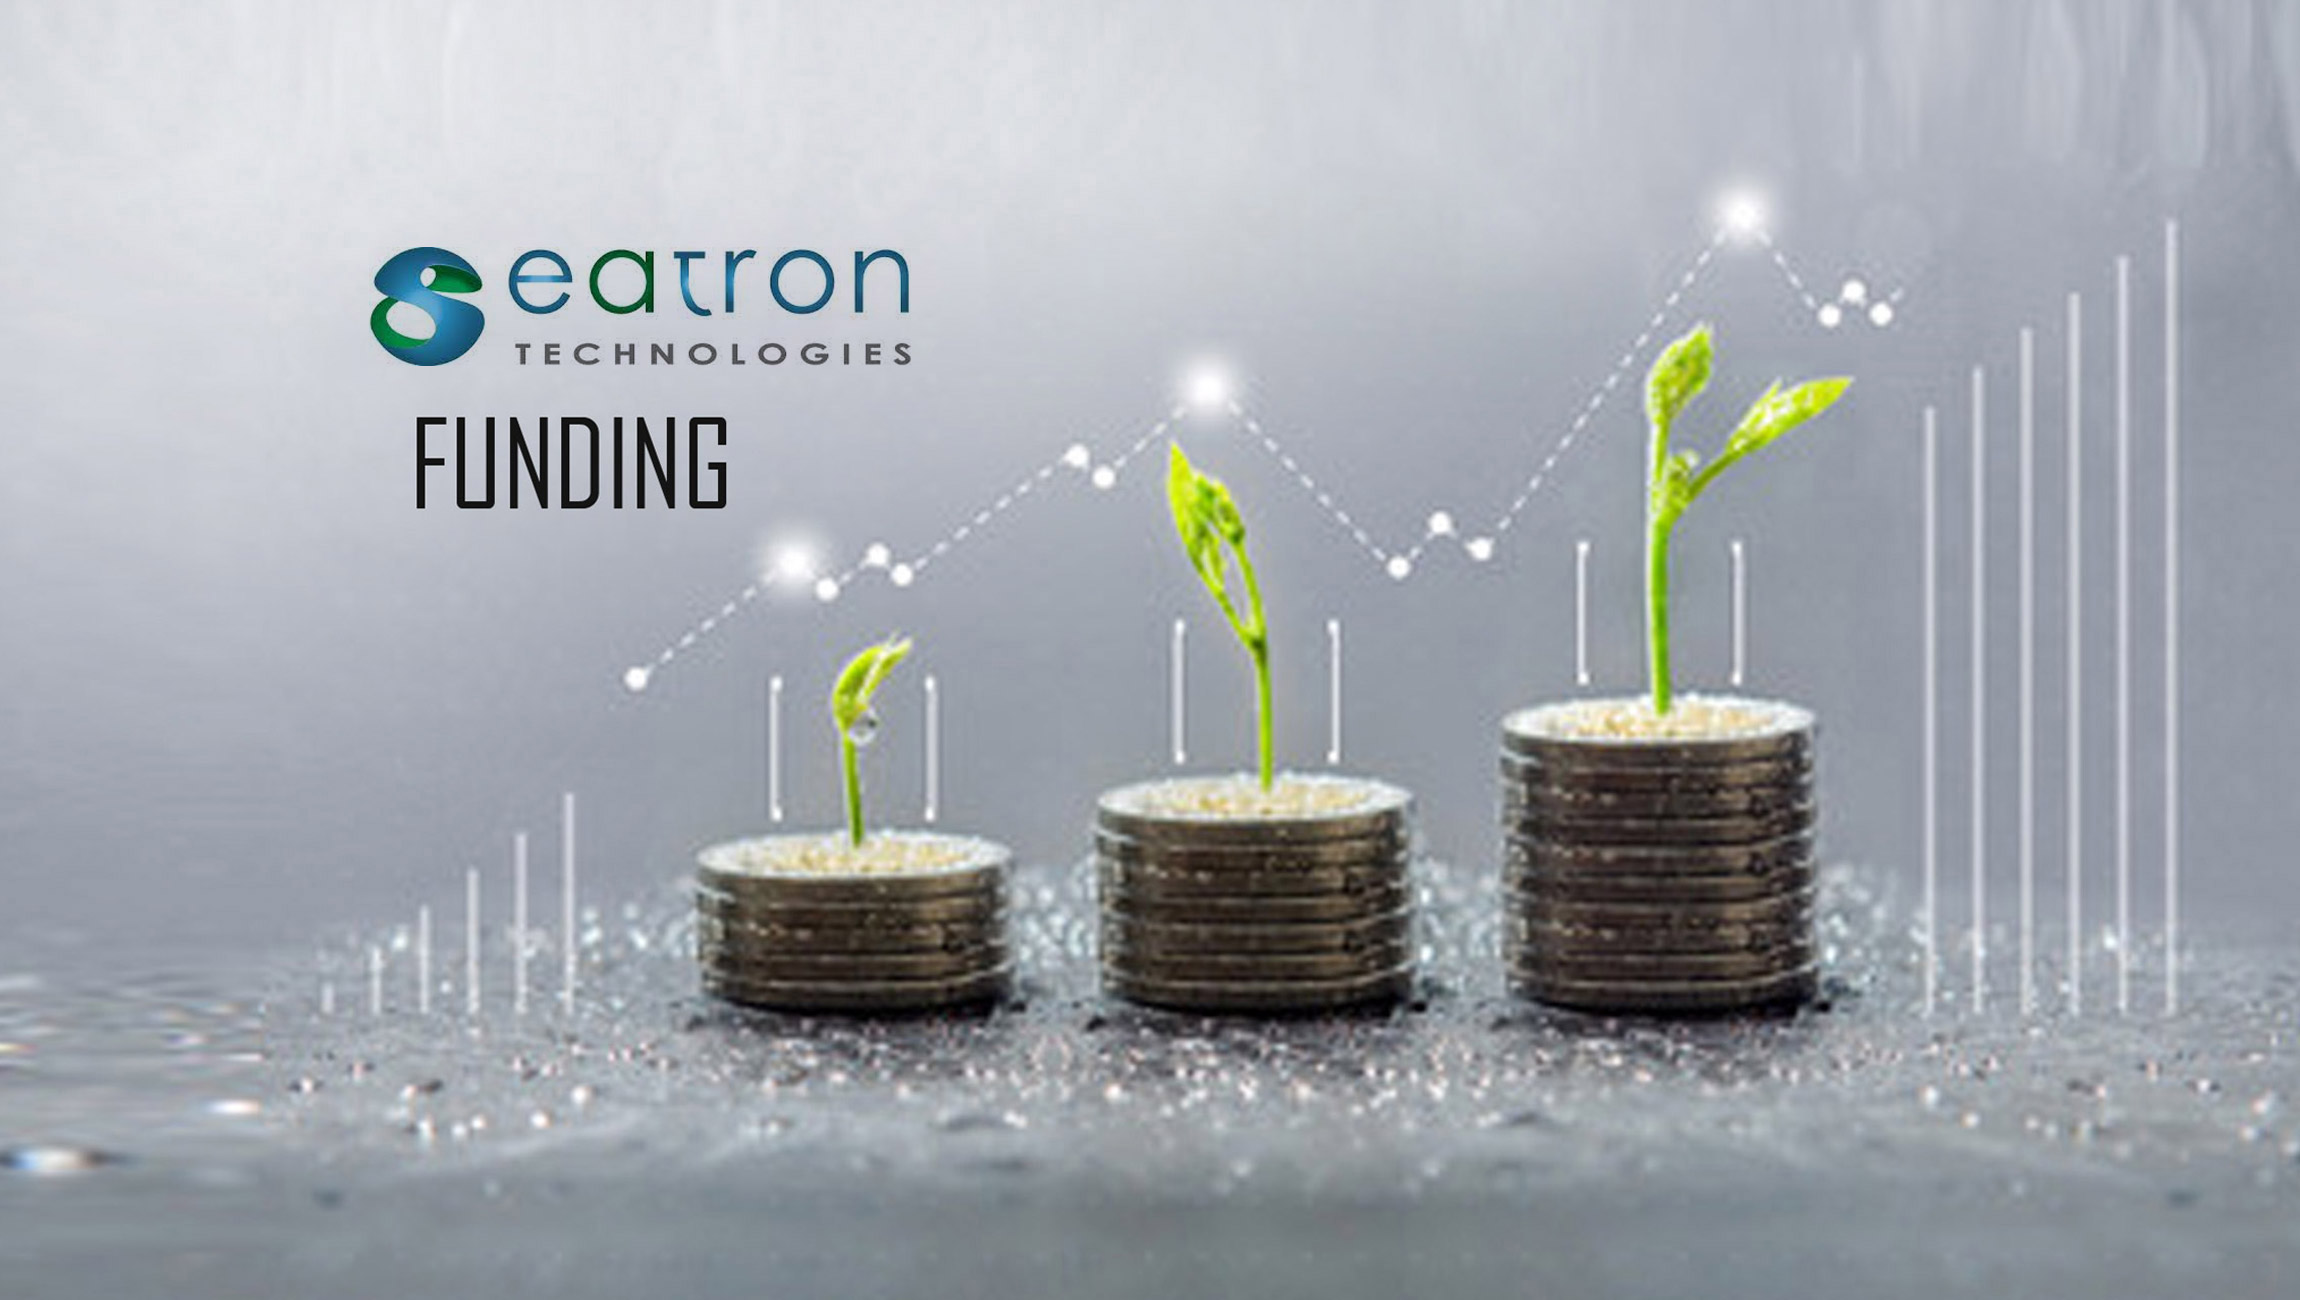 Intelligent Automotive Software Platform Company Eatron Raises $11M in Series-A funding to Accelerate its Global Growth